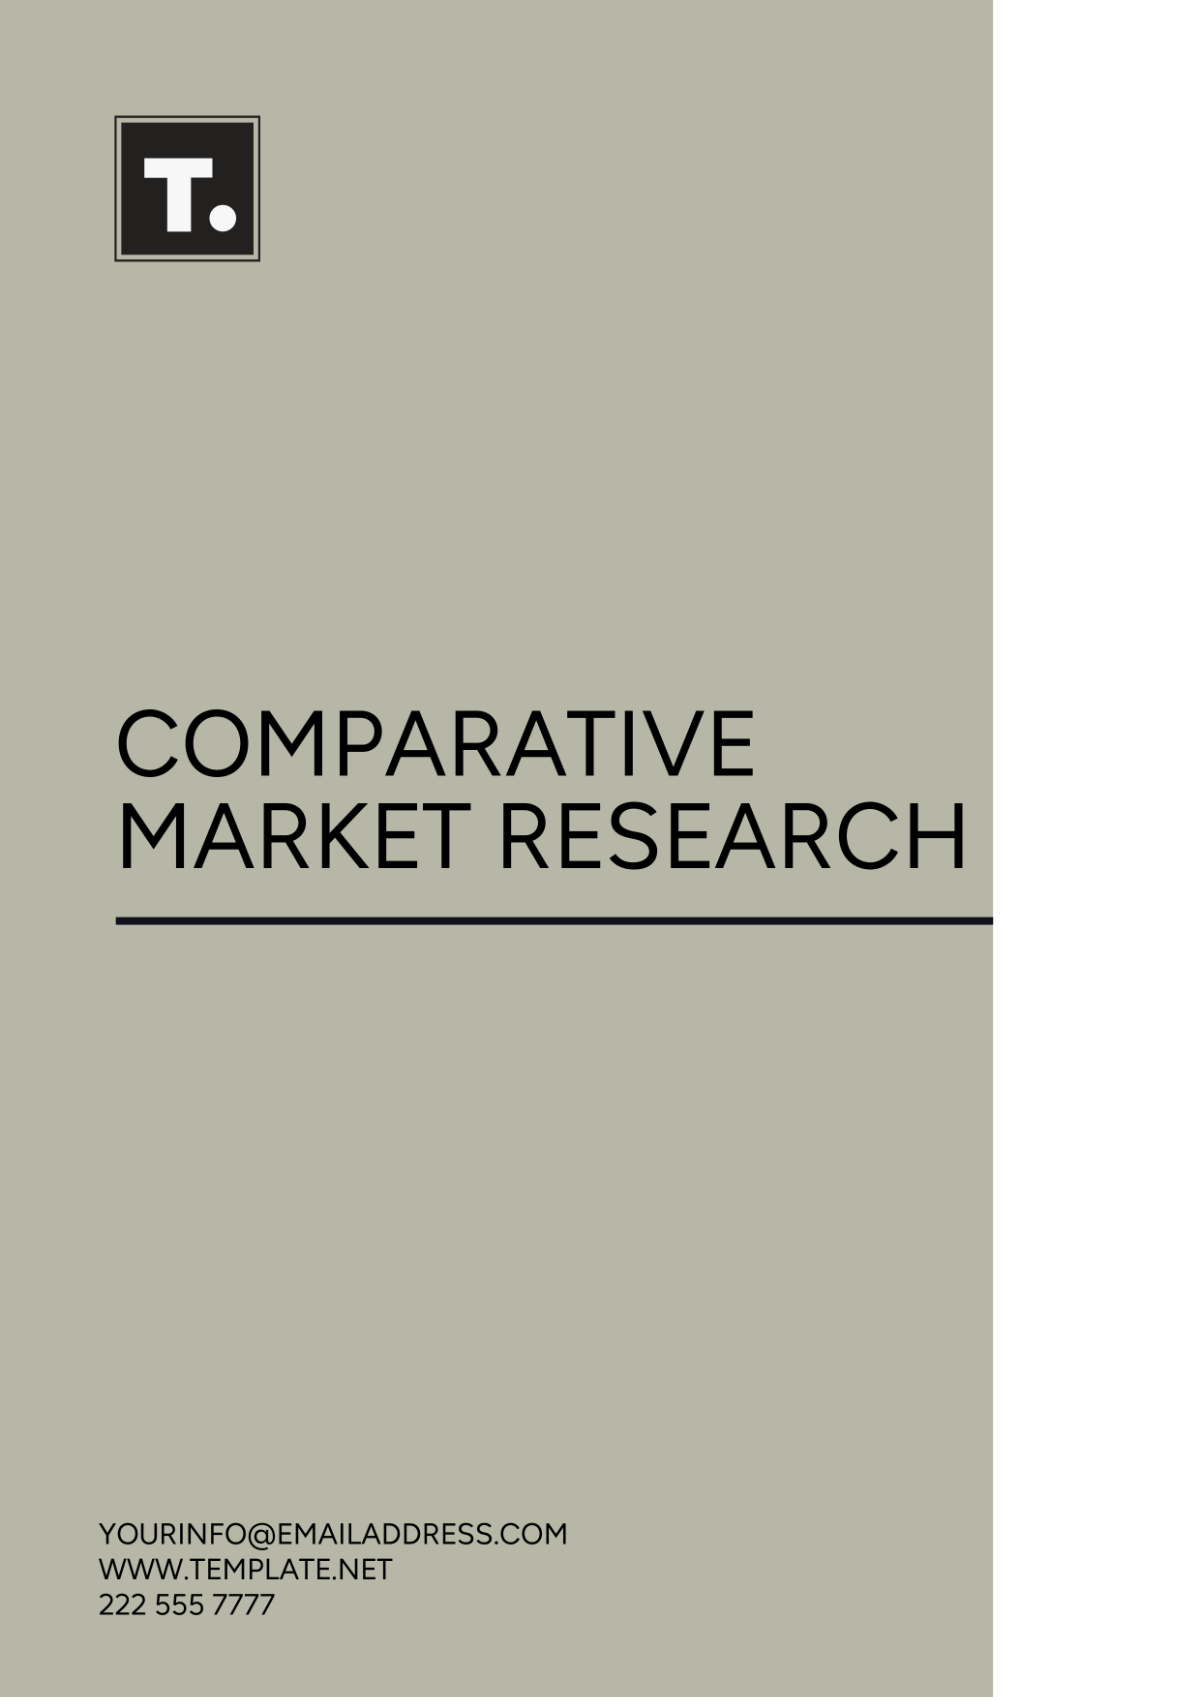 Free Comparative Market Research Template